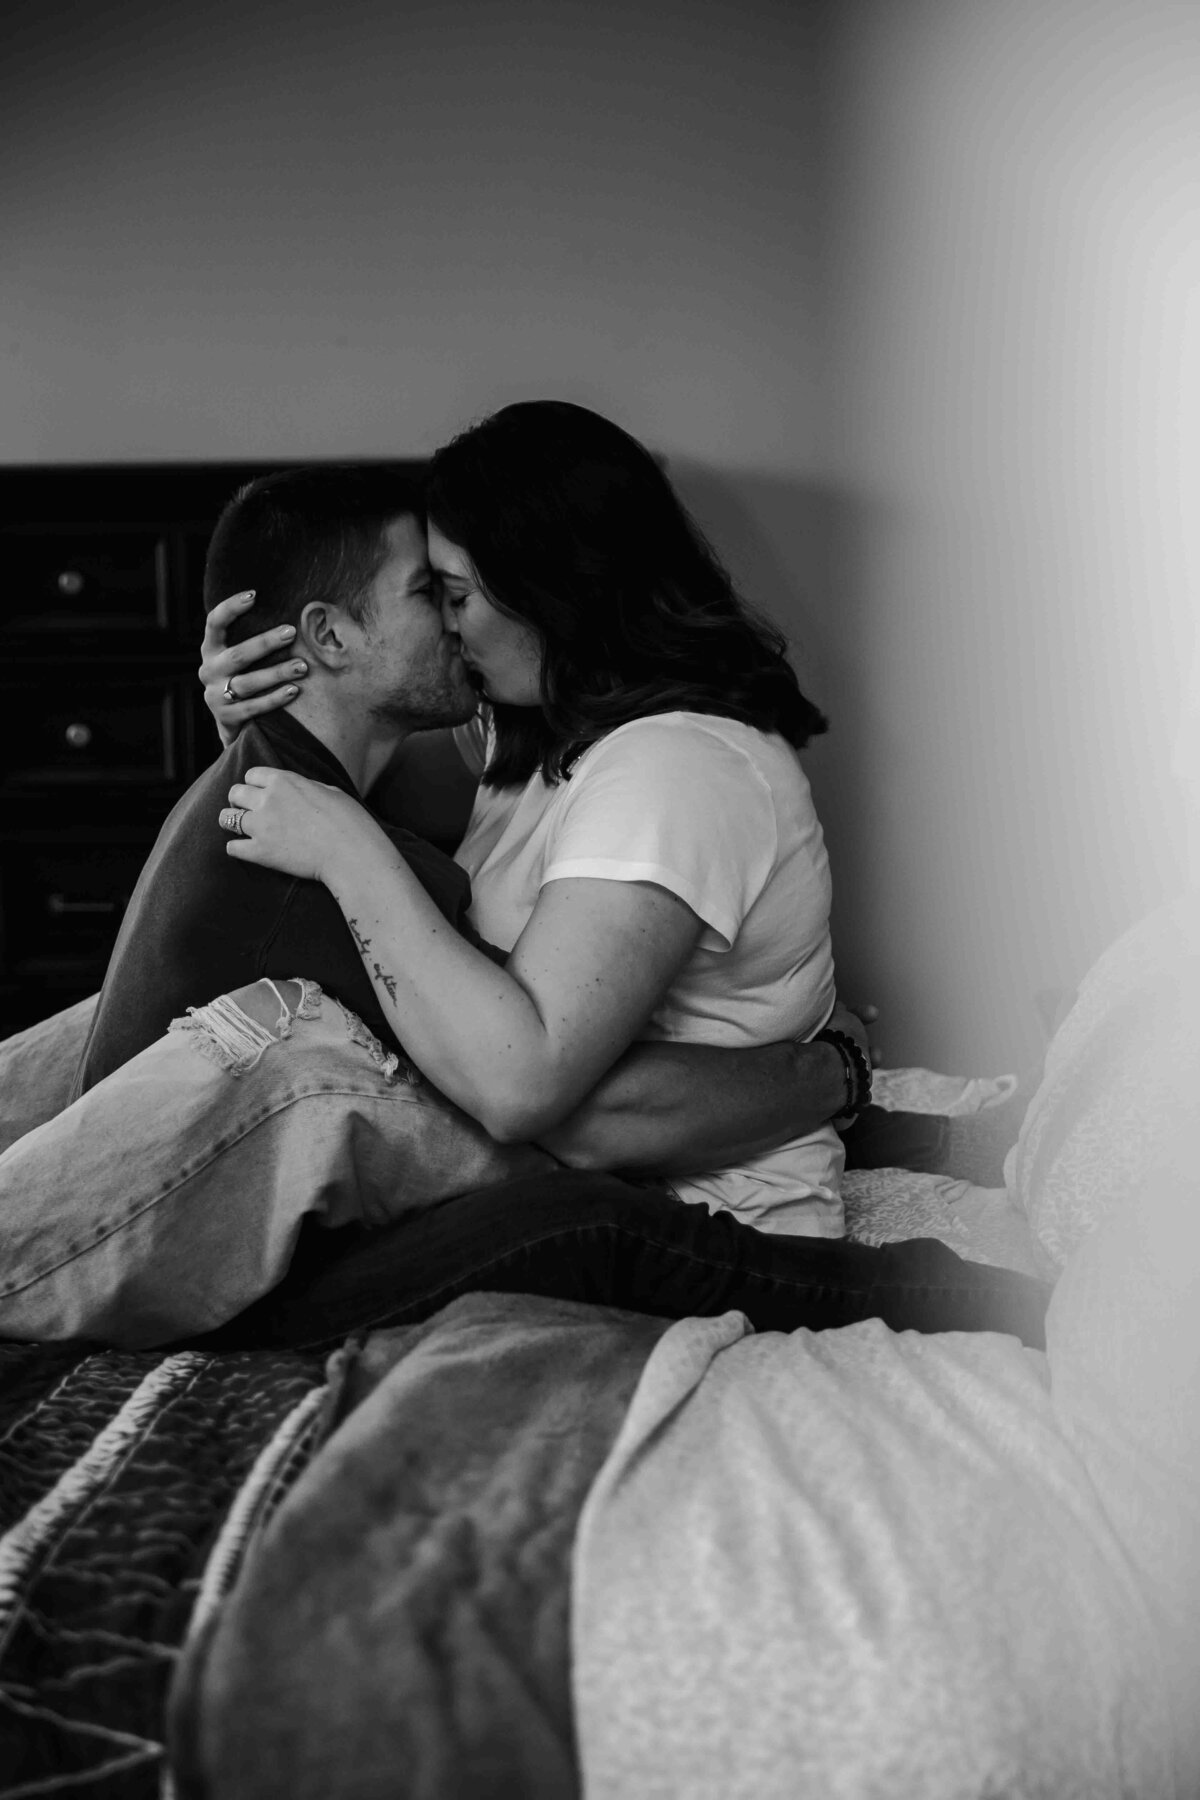 husband and wife sitting in bed kissing, seen through the doorway in black and white